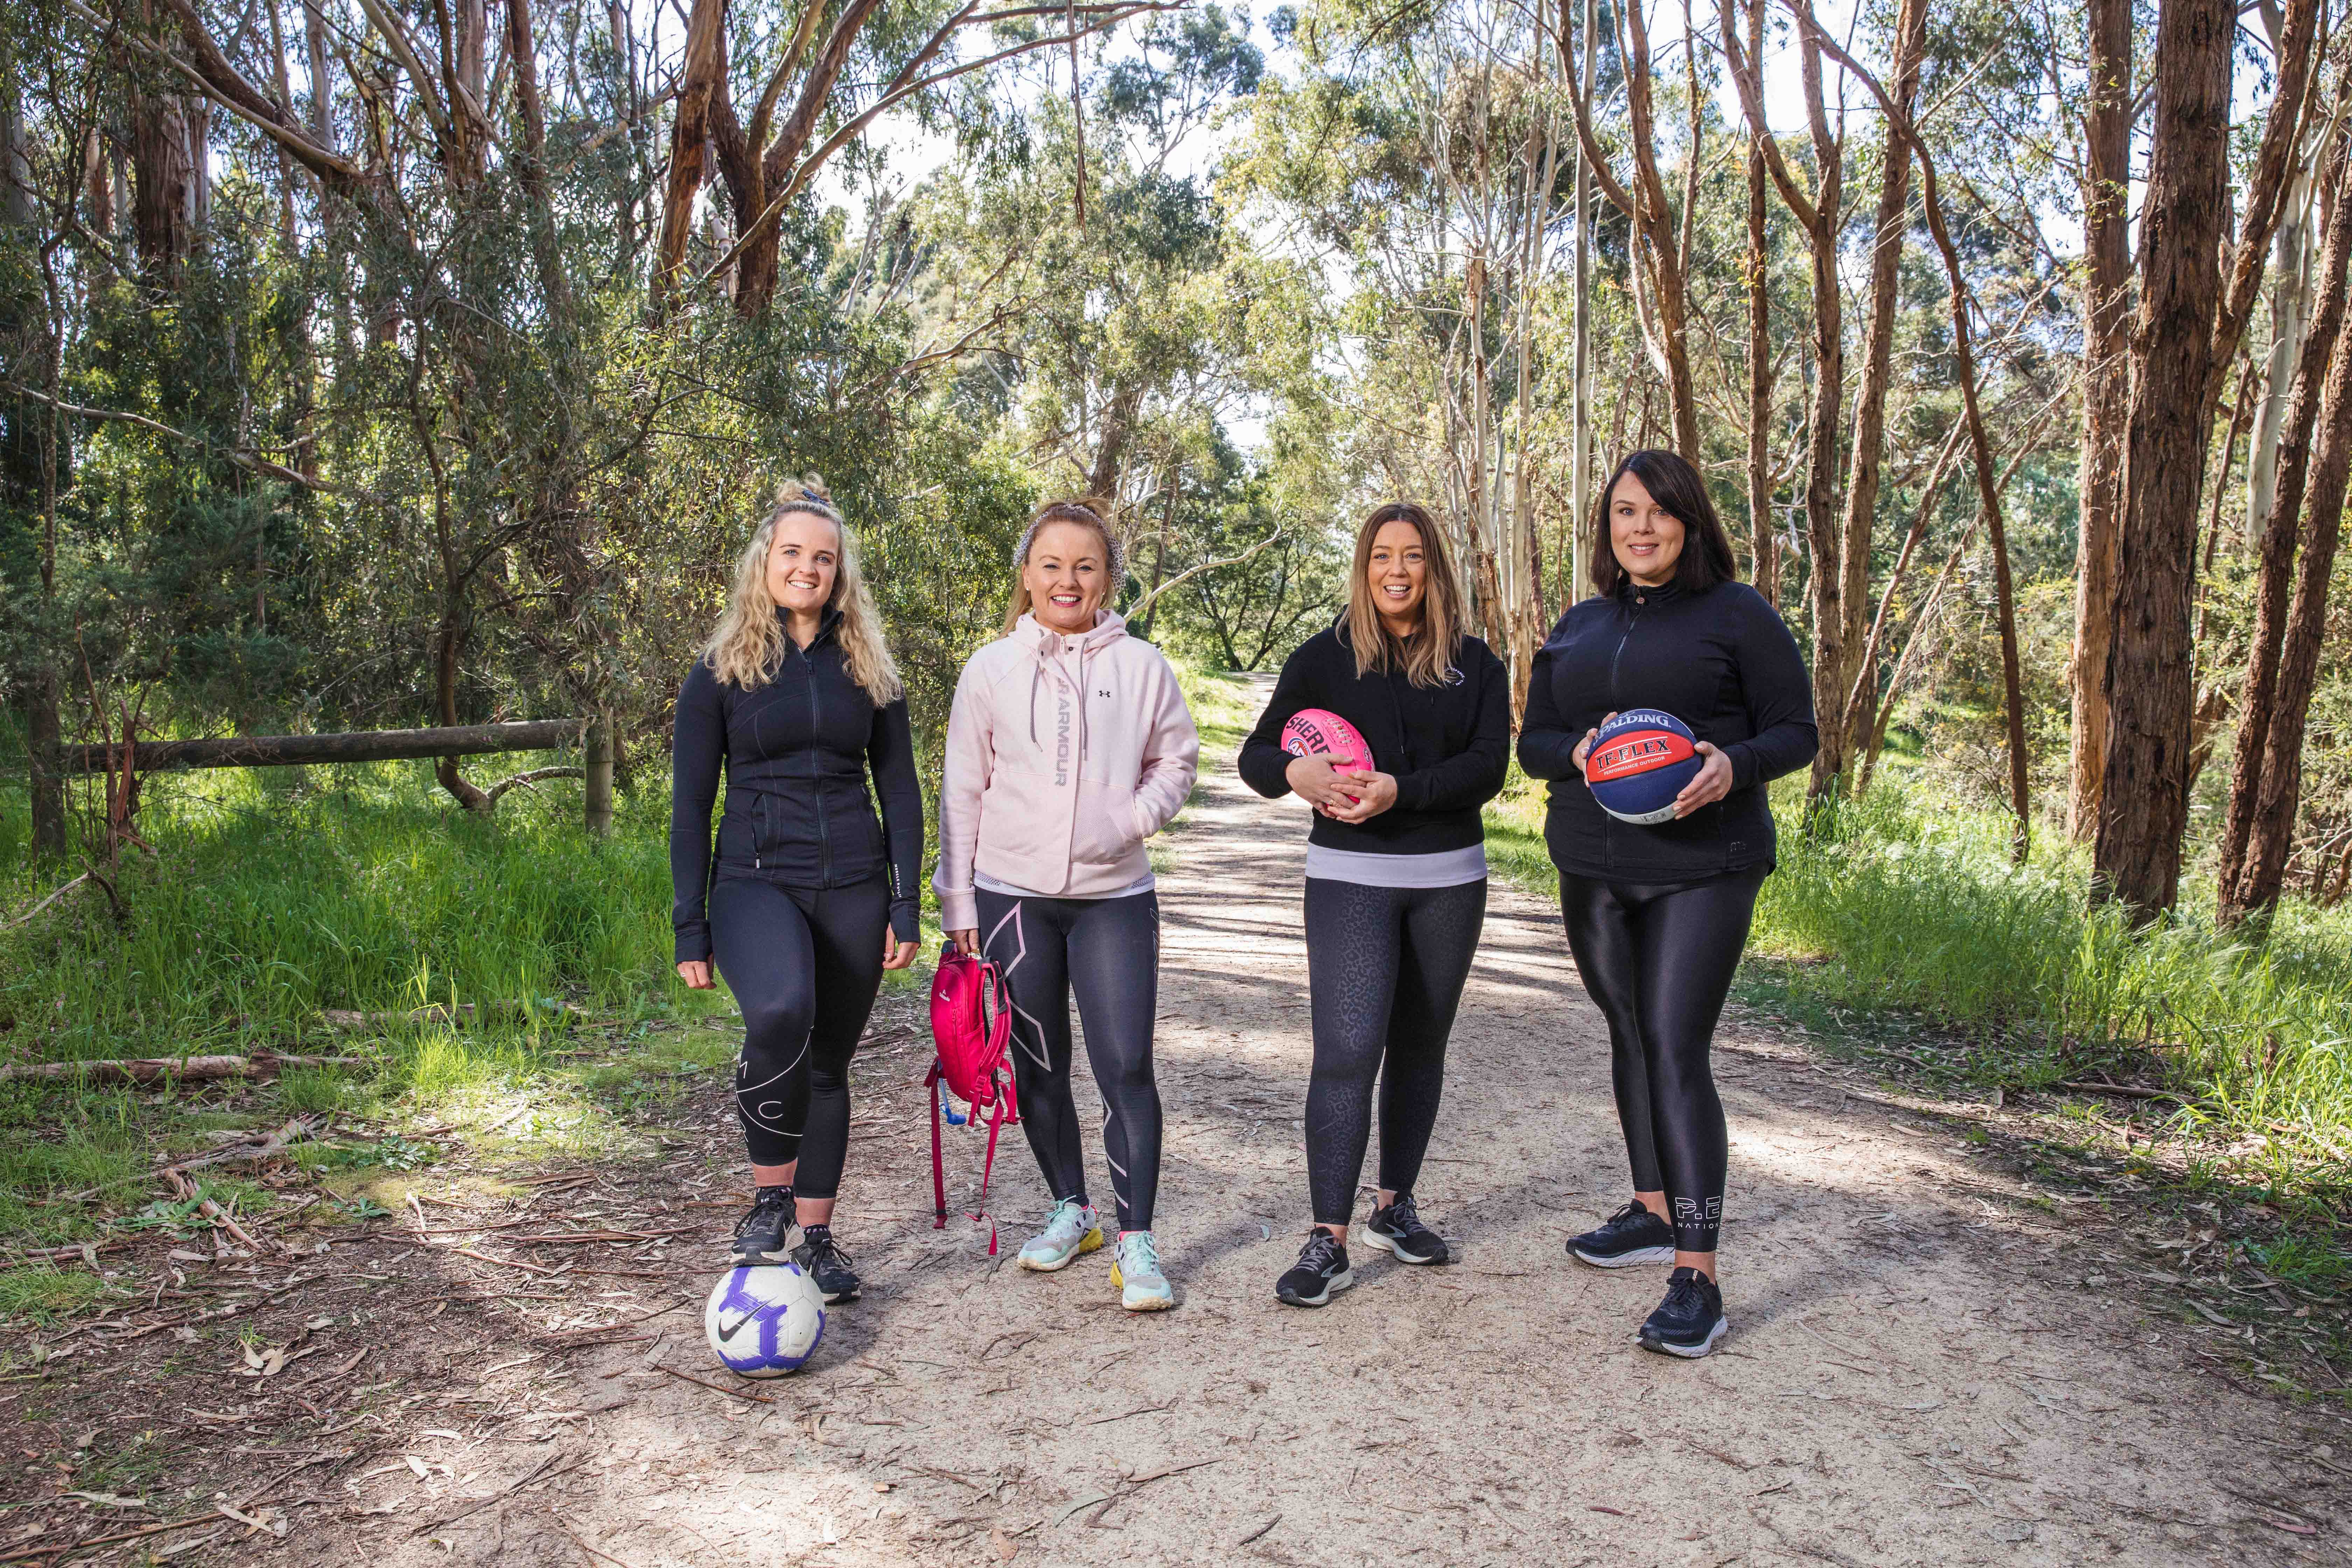 City of Ballarat’s Active Women and Girls Strategy photoshoot in 2021.